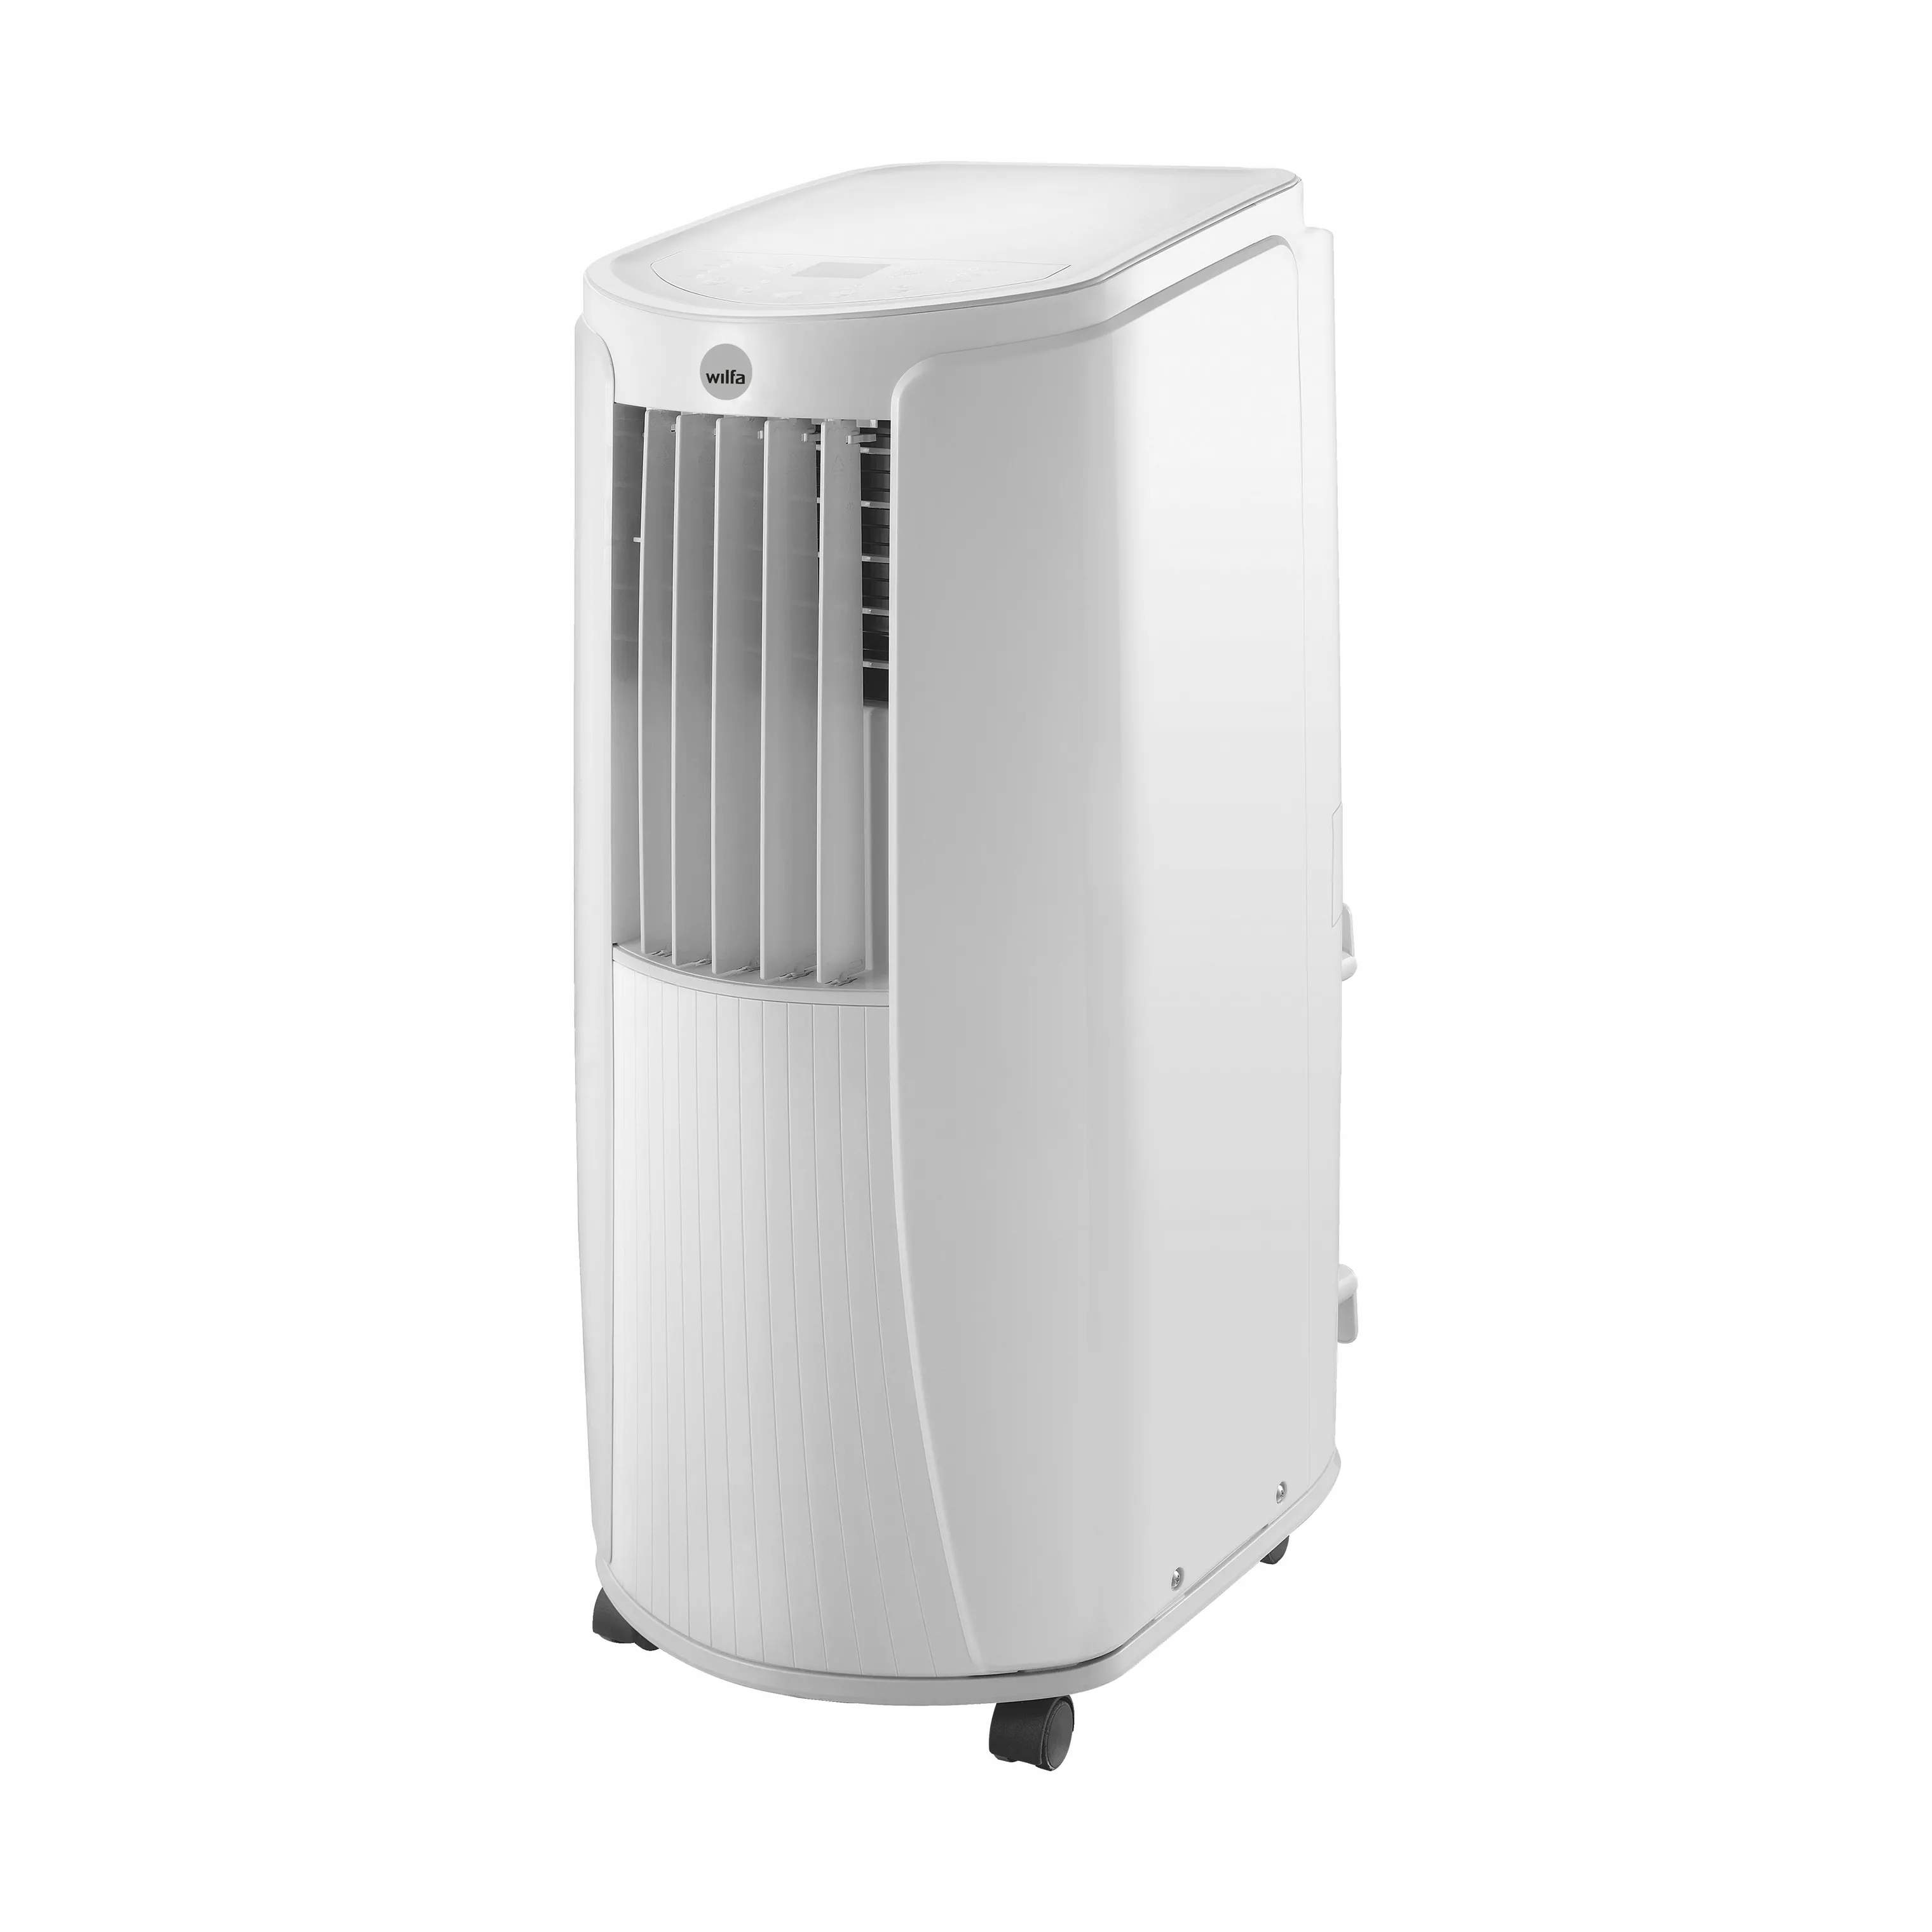 Wilfa aircondition COOL 12 Mobil Airconditioner